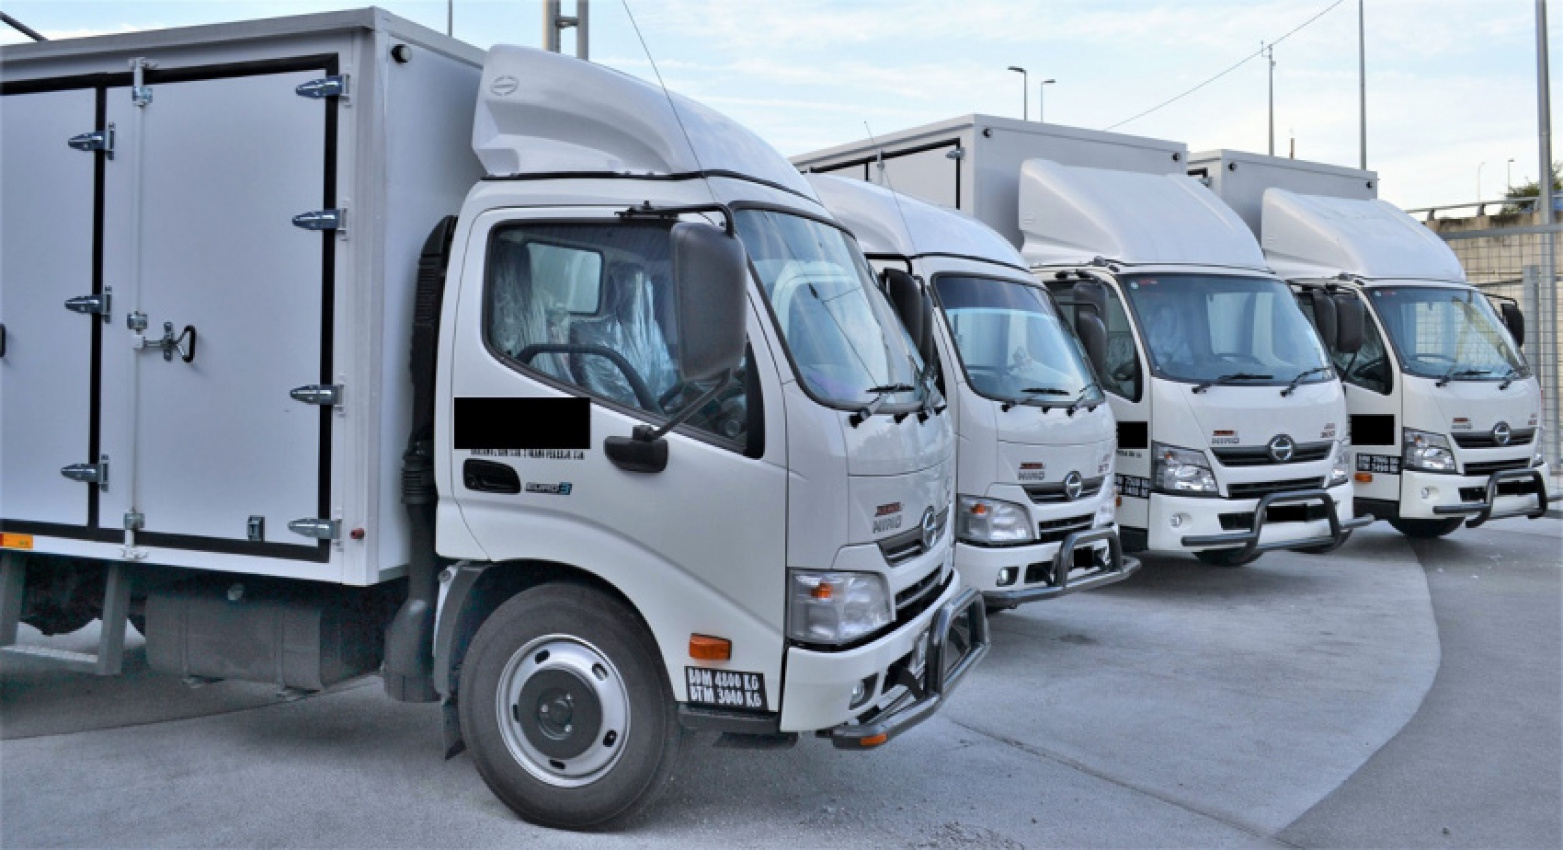 autos, cars, commercial vehicles, 3s centre, 3s dealer, after sales, commercial vehicles, dealership, eng kee commercial vehicles, hino, hino malaysia, hino motors sales (malaysia), trucks, warranty, hino dealership in klang upgraded to 3s centre